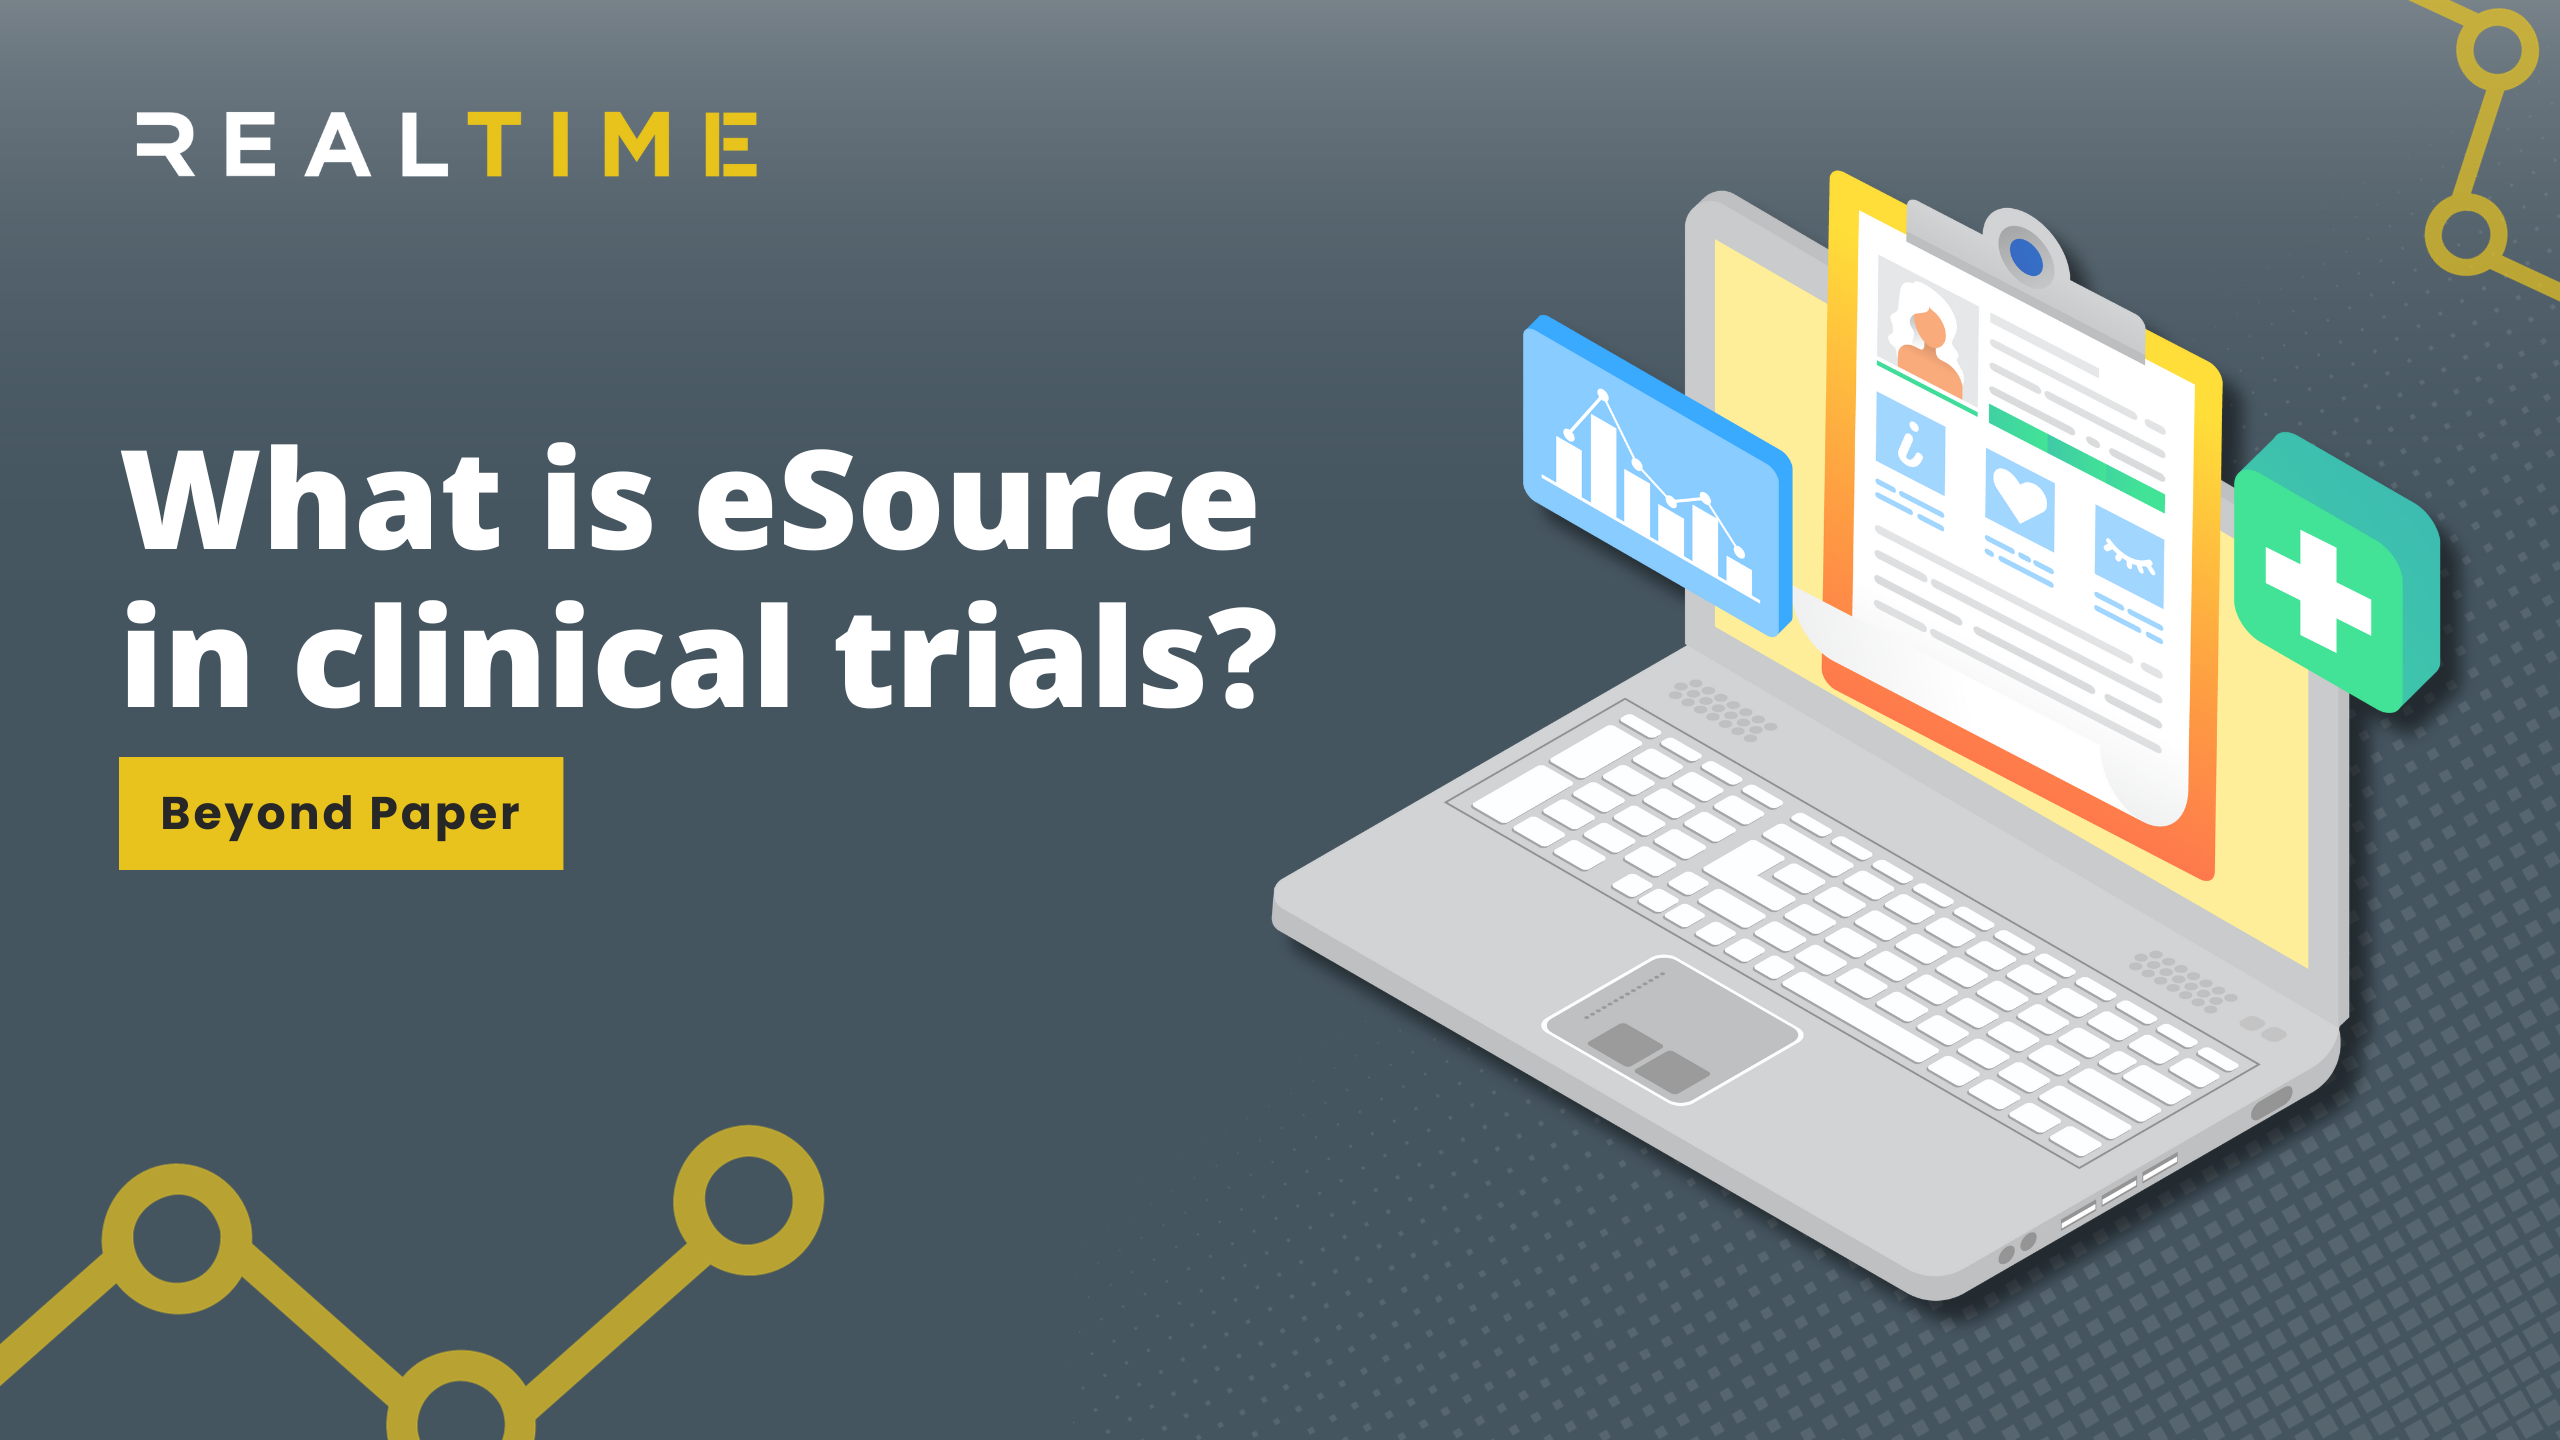 What is eSource in Clinical Trials?